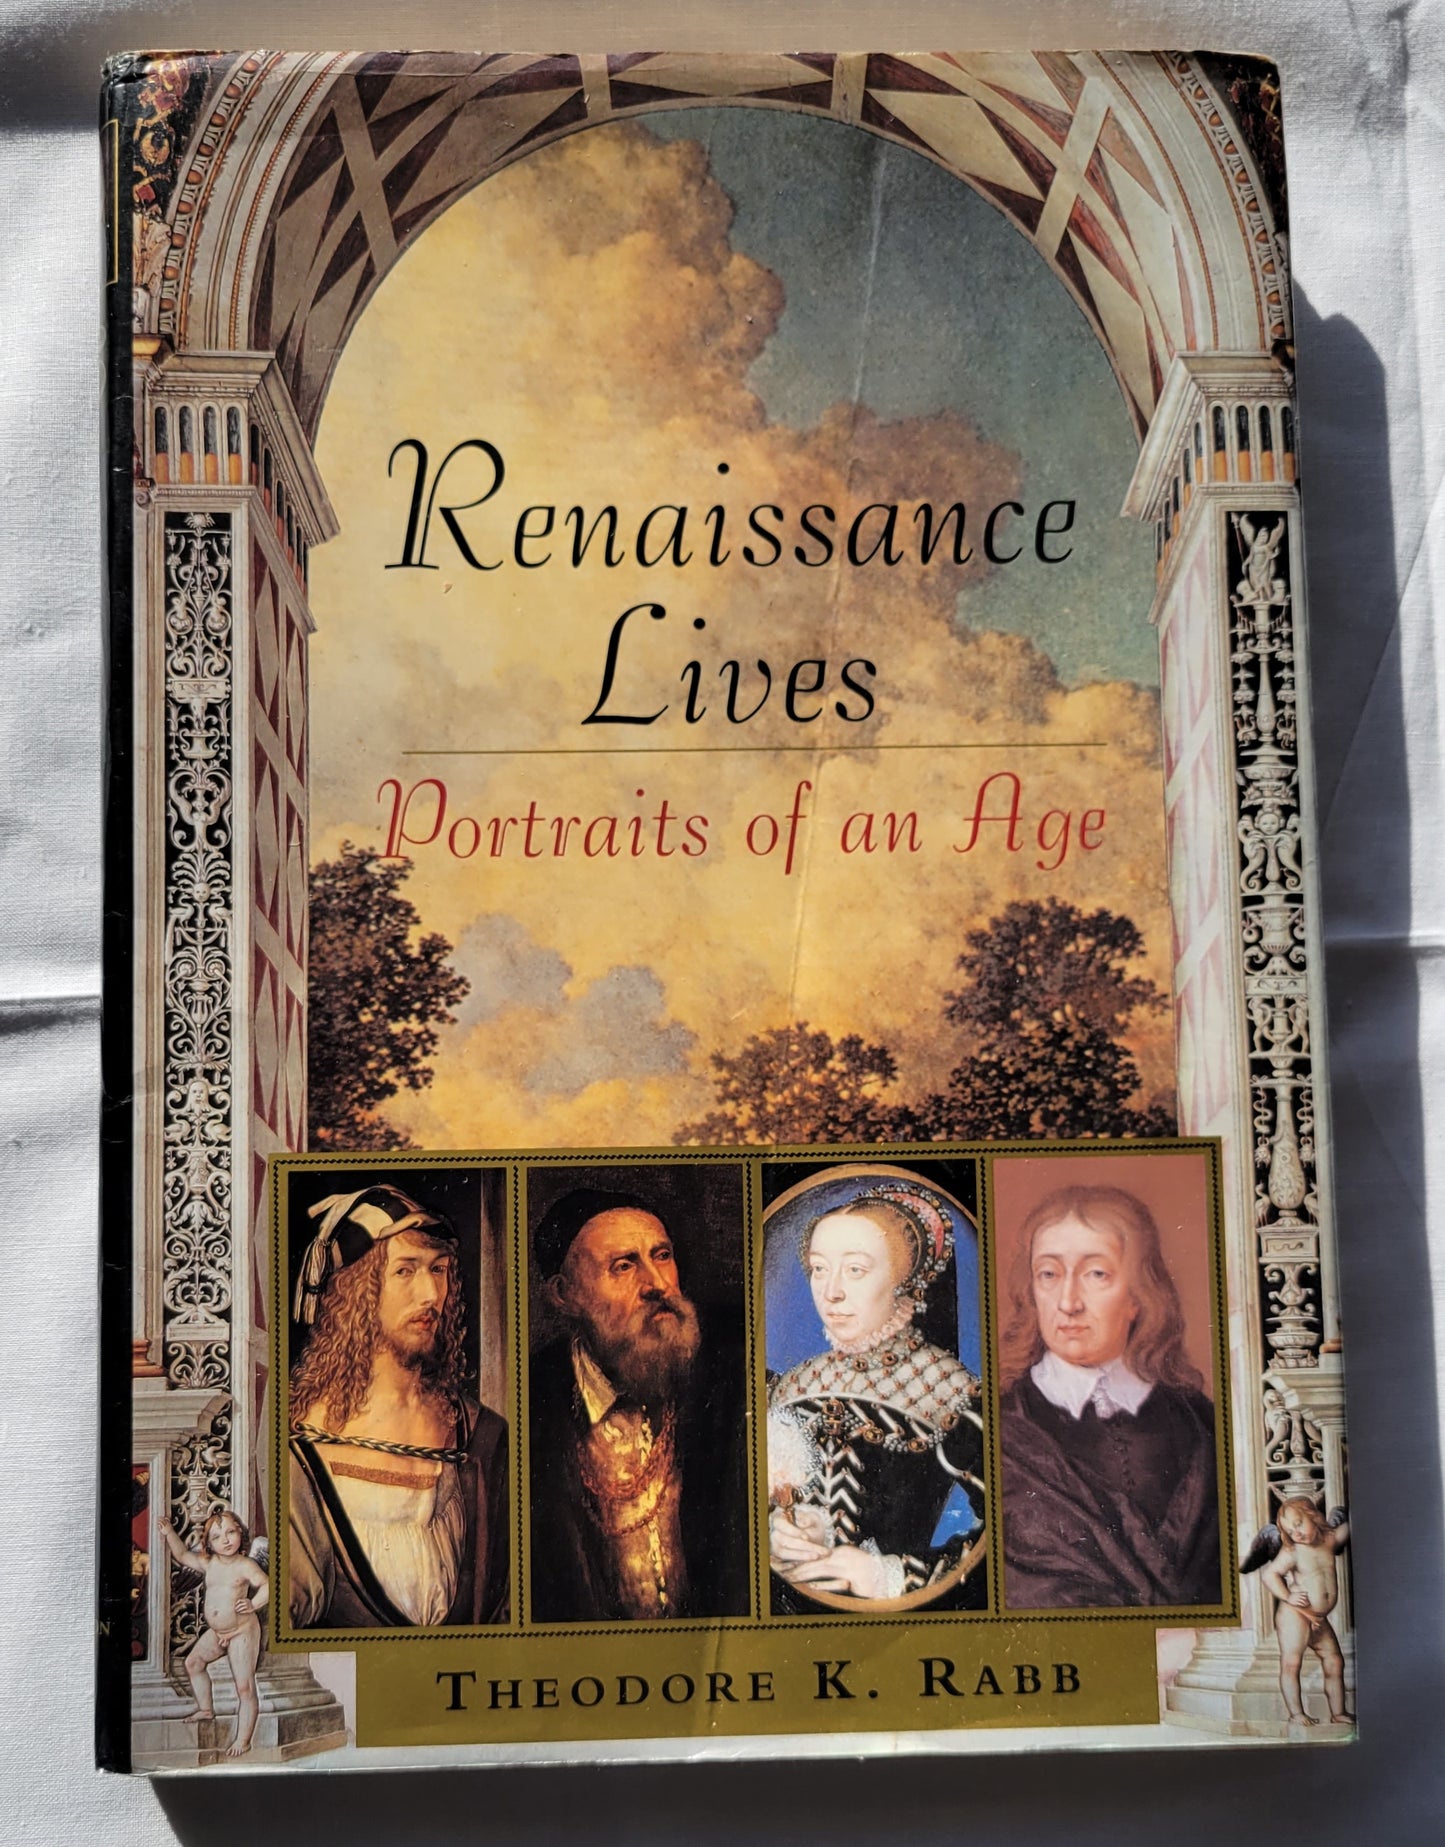 Used book for sale, "Renaissance Lives: Portraits of an Age" by Theodore K. Rabb published by Basic Books in 1993. View of front cover with jacket.